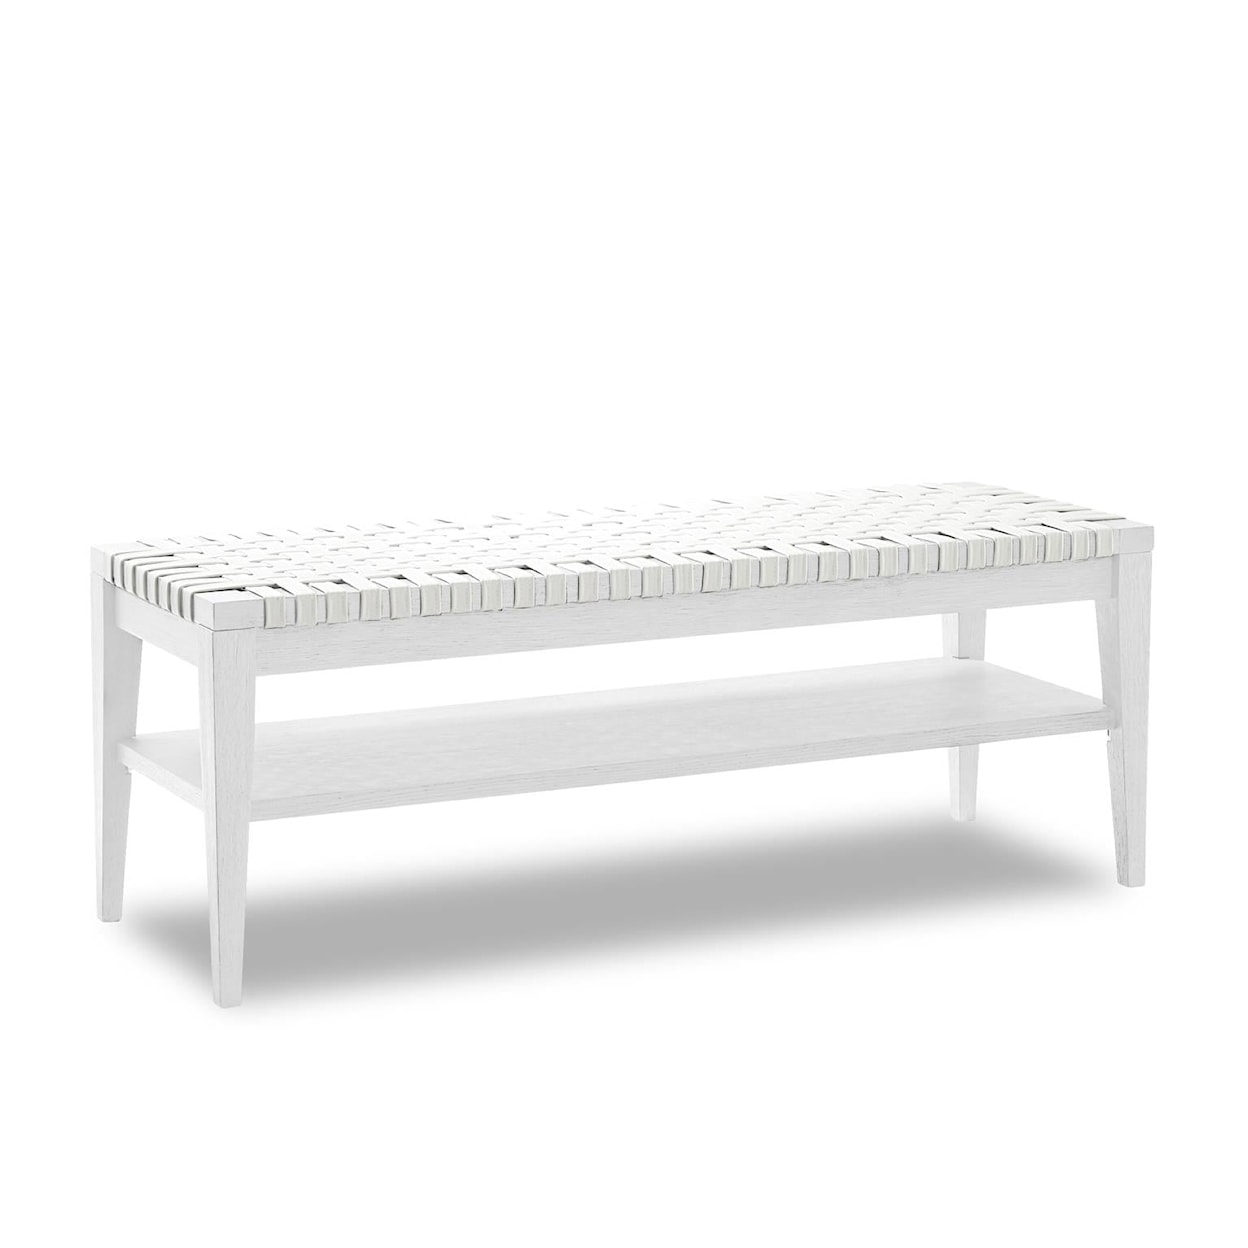 Trisha Yearwood Home Collection by Legacy Classic Staycation Woven Bench